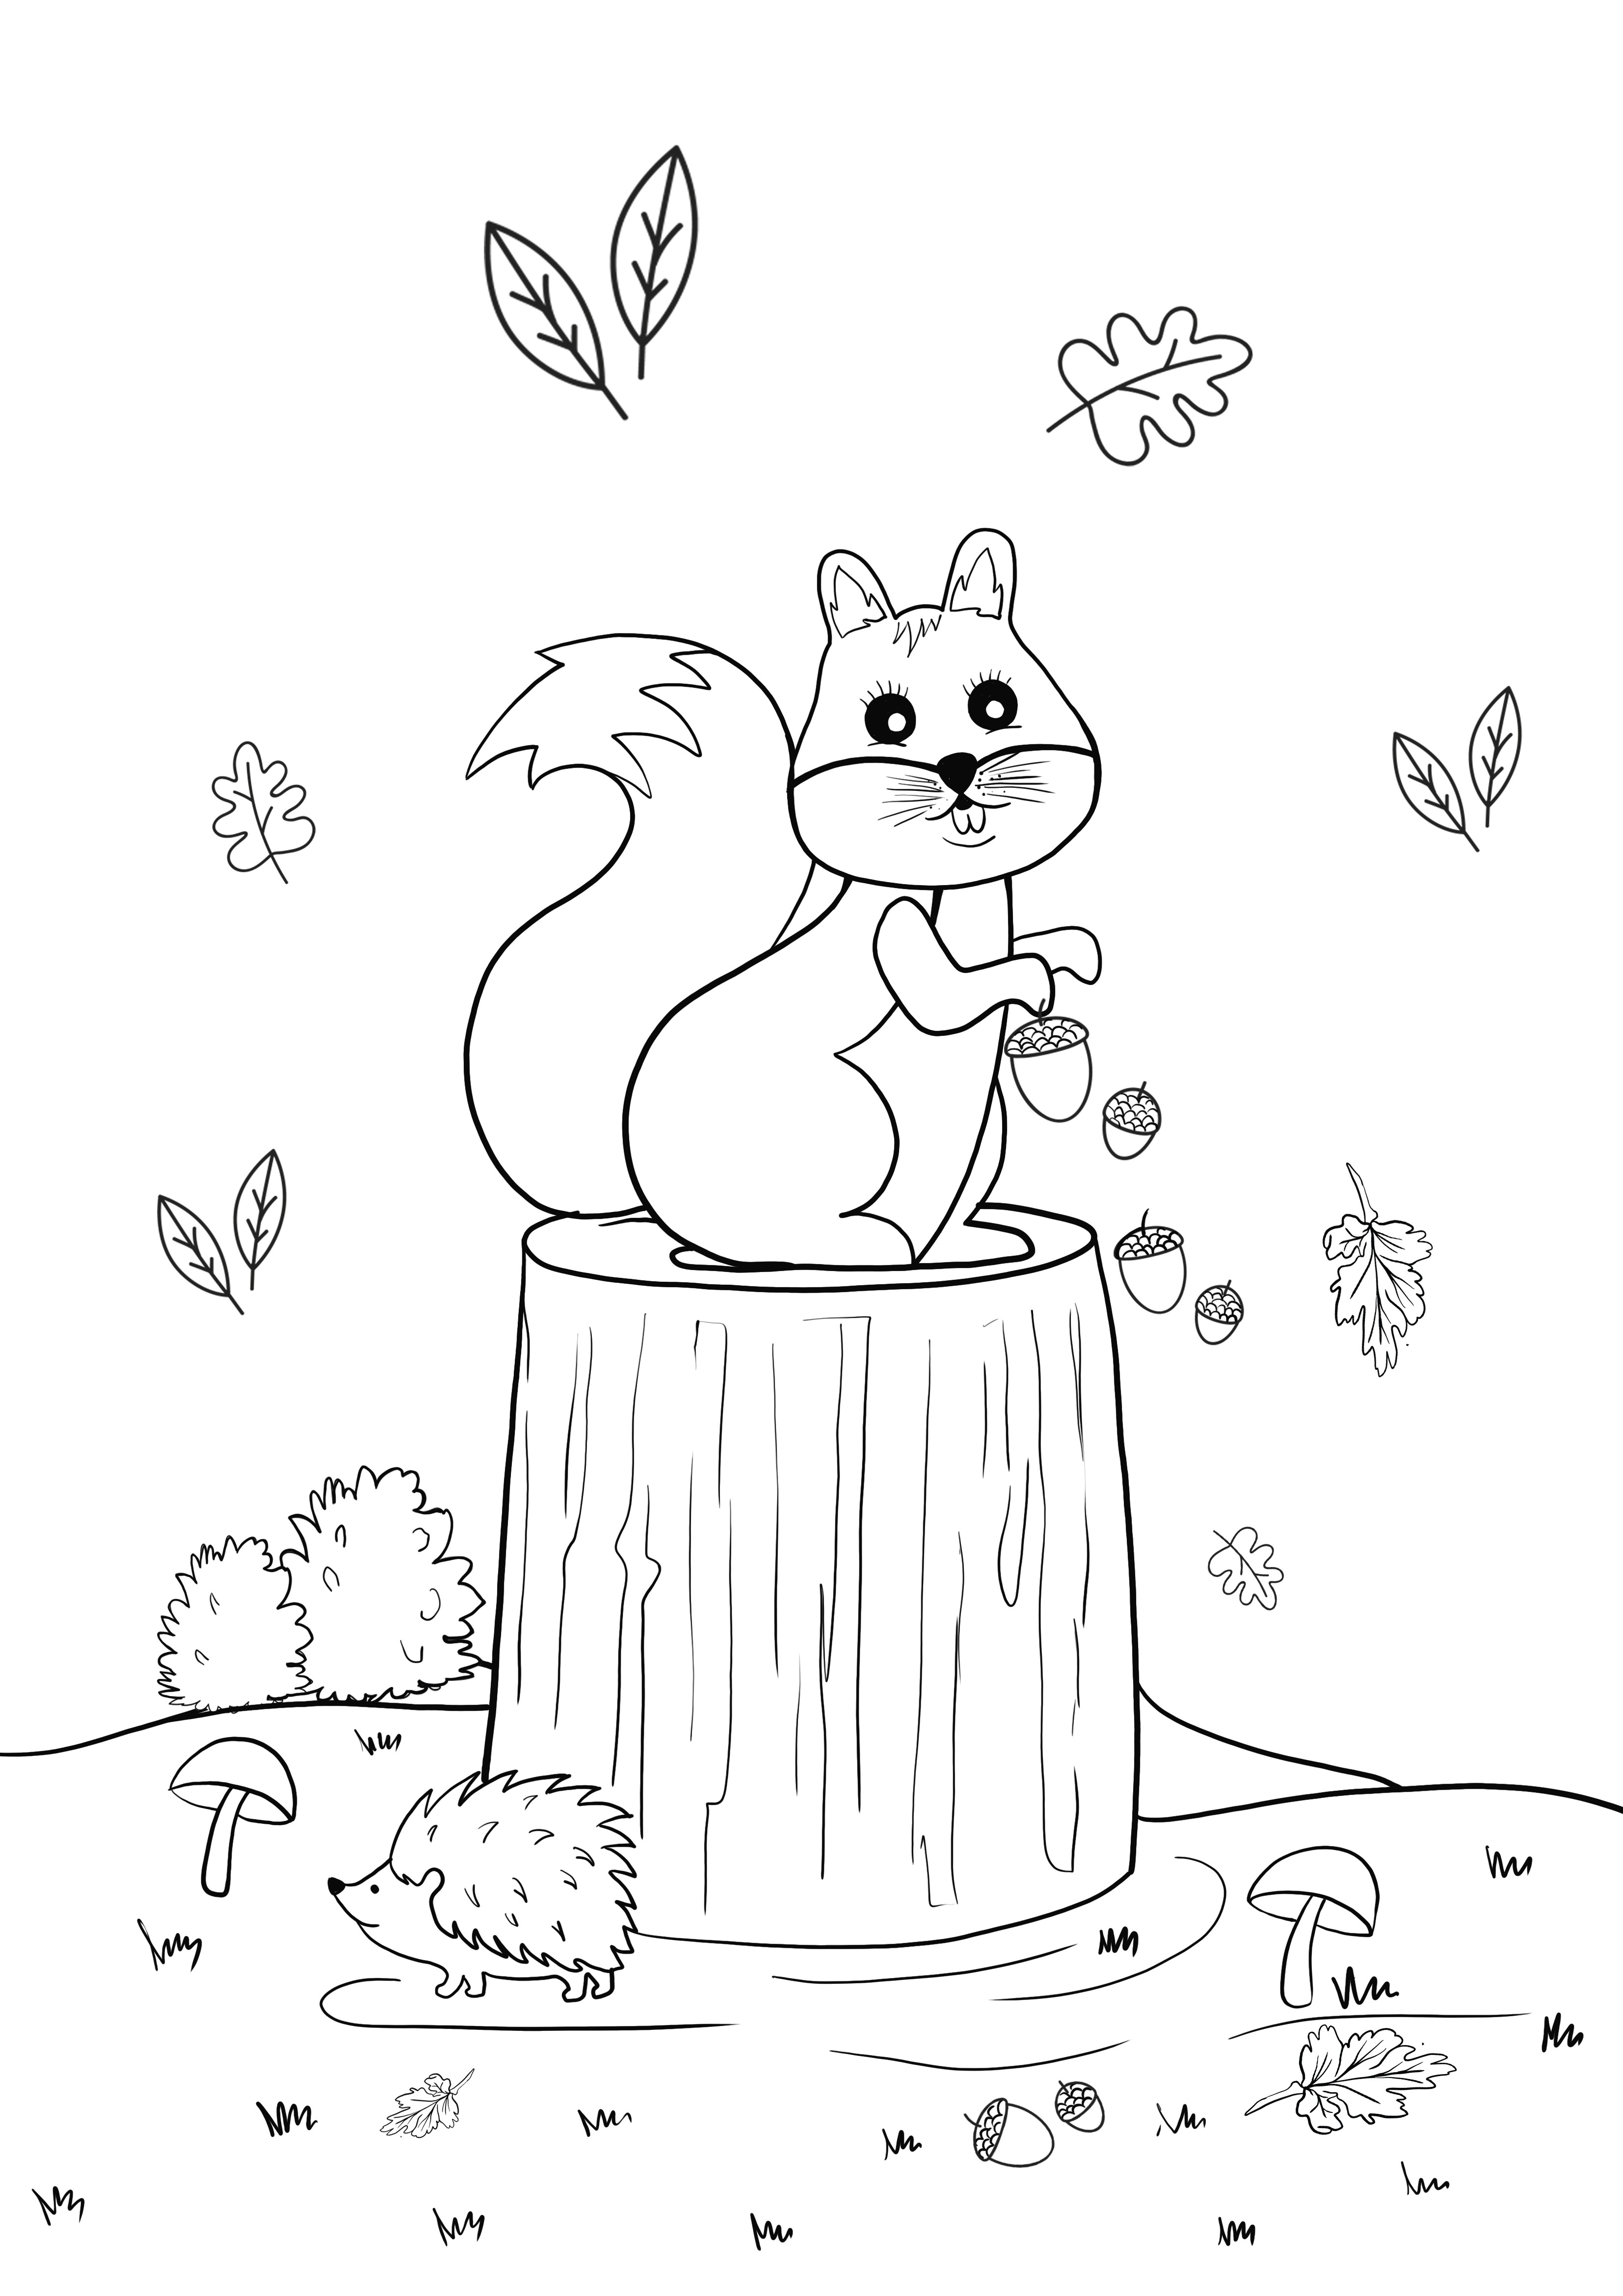 squirrel on a log coloring and printing for free